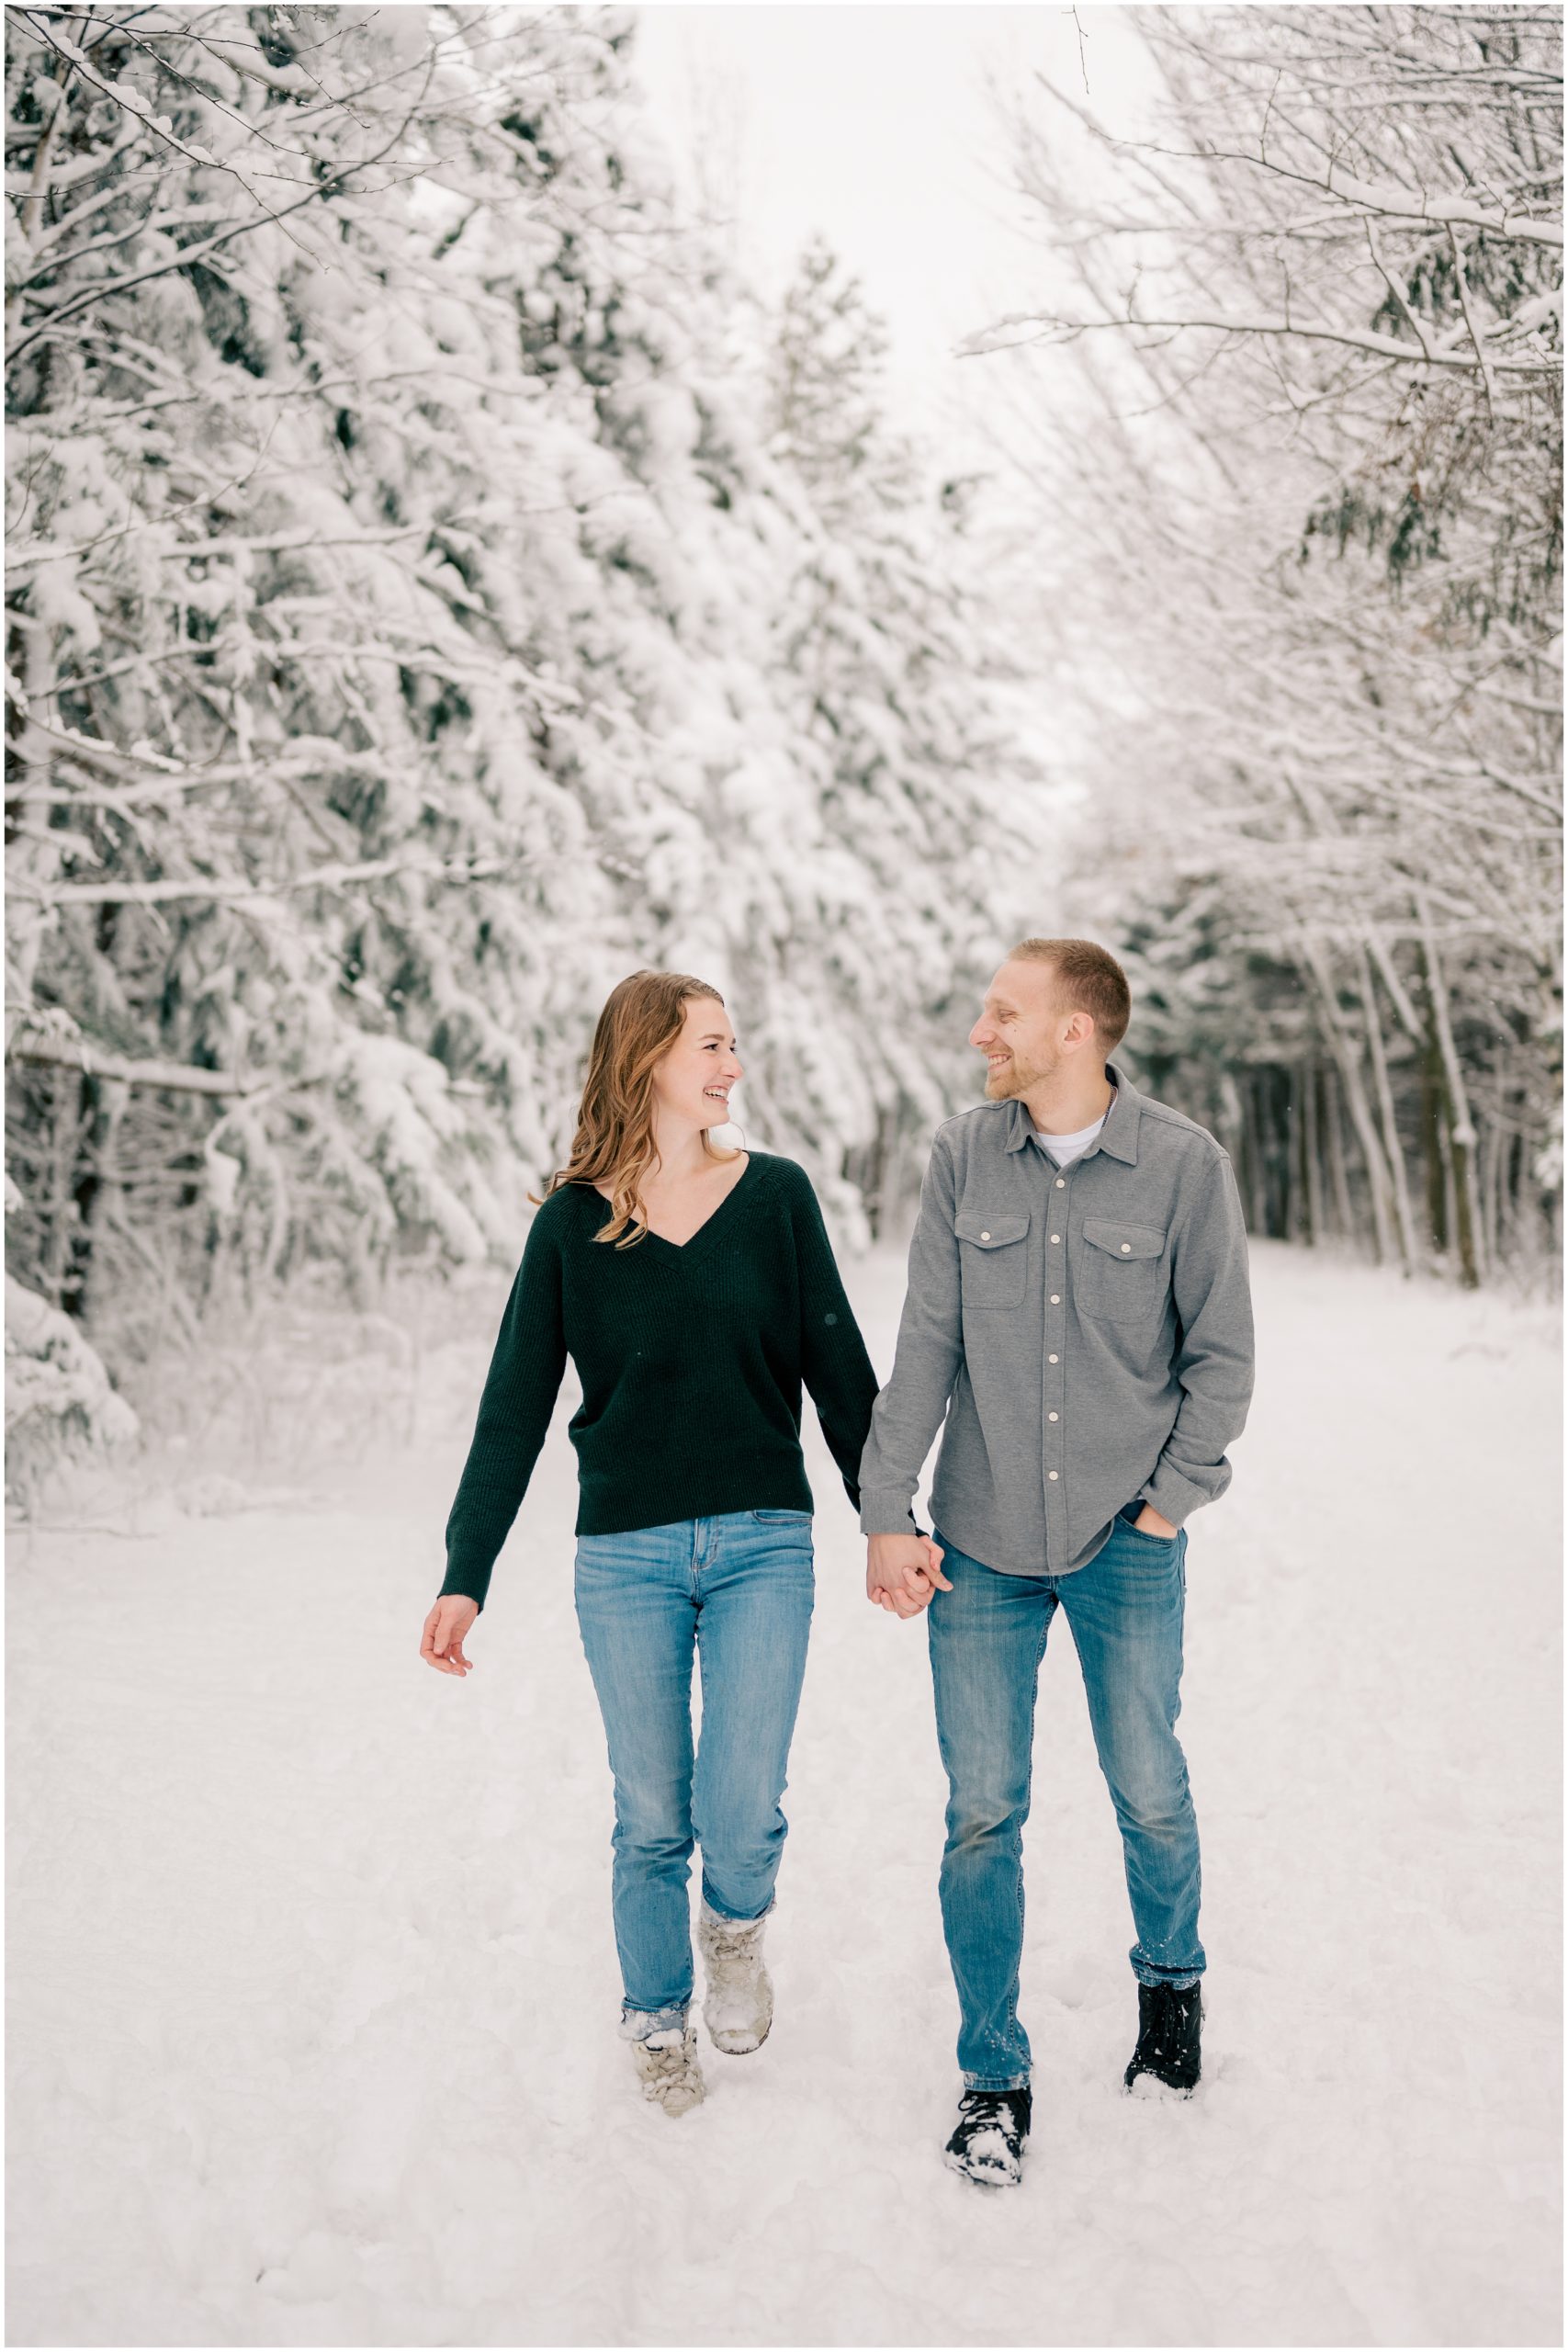 This couple's session was one for the books! Perfect snow and a wonderful couple.